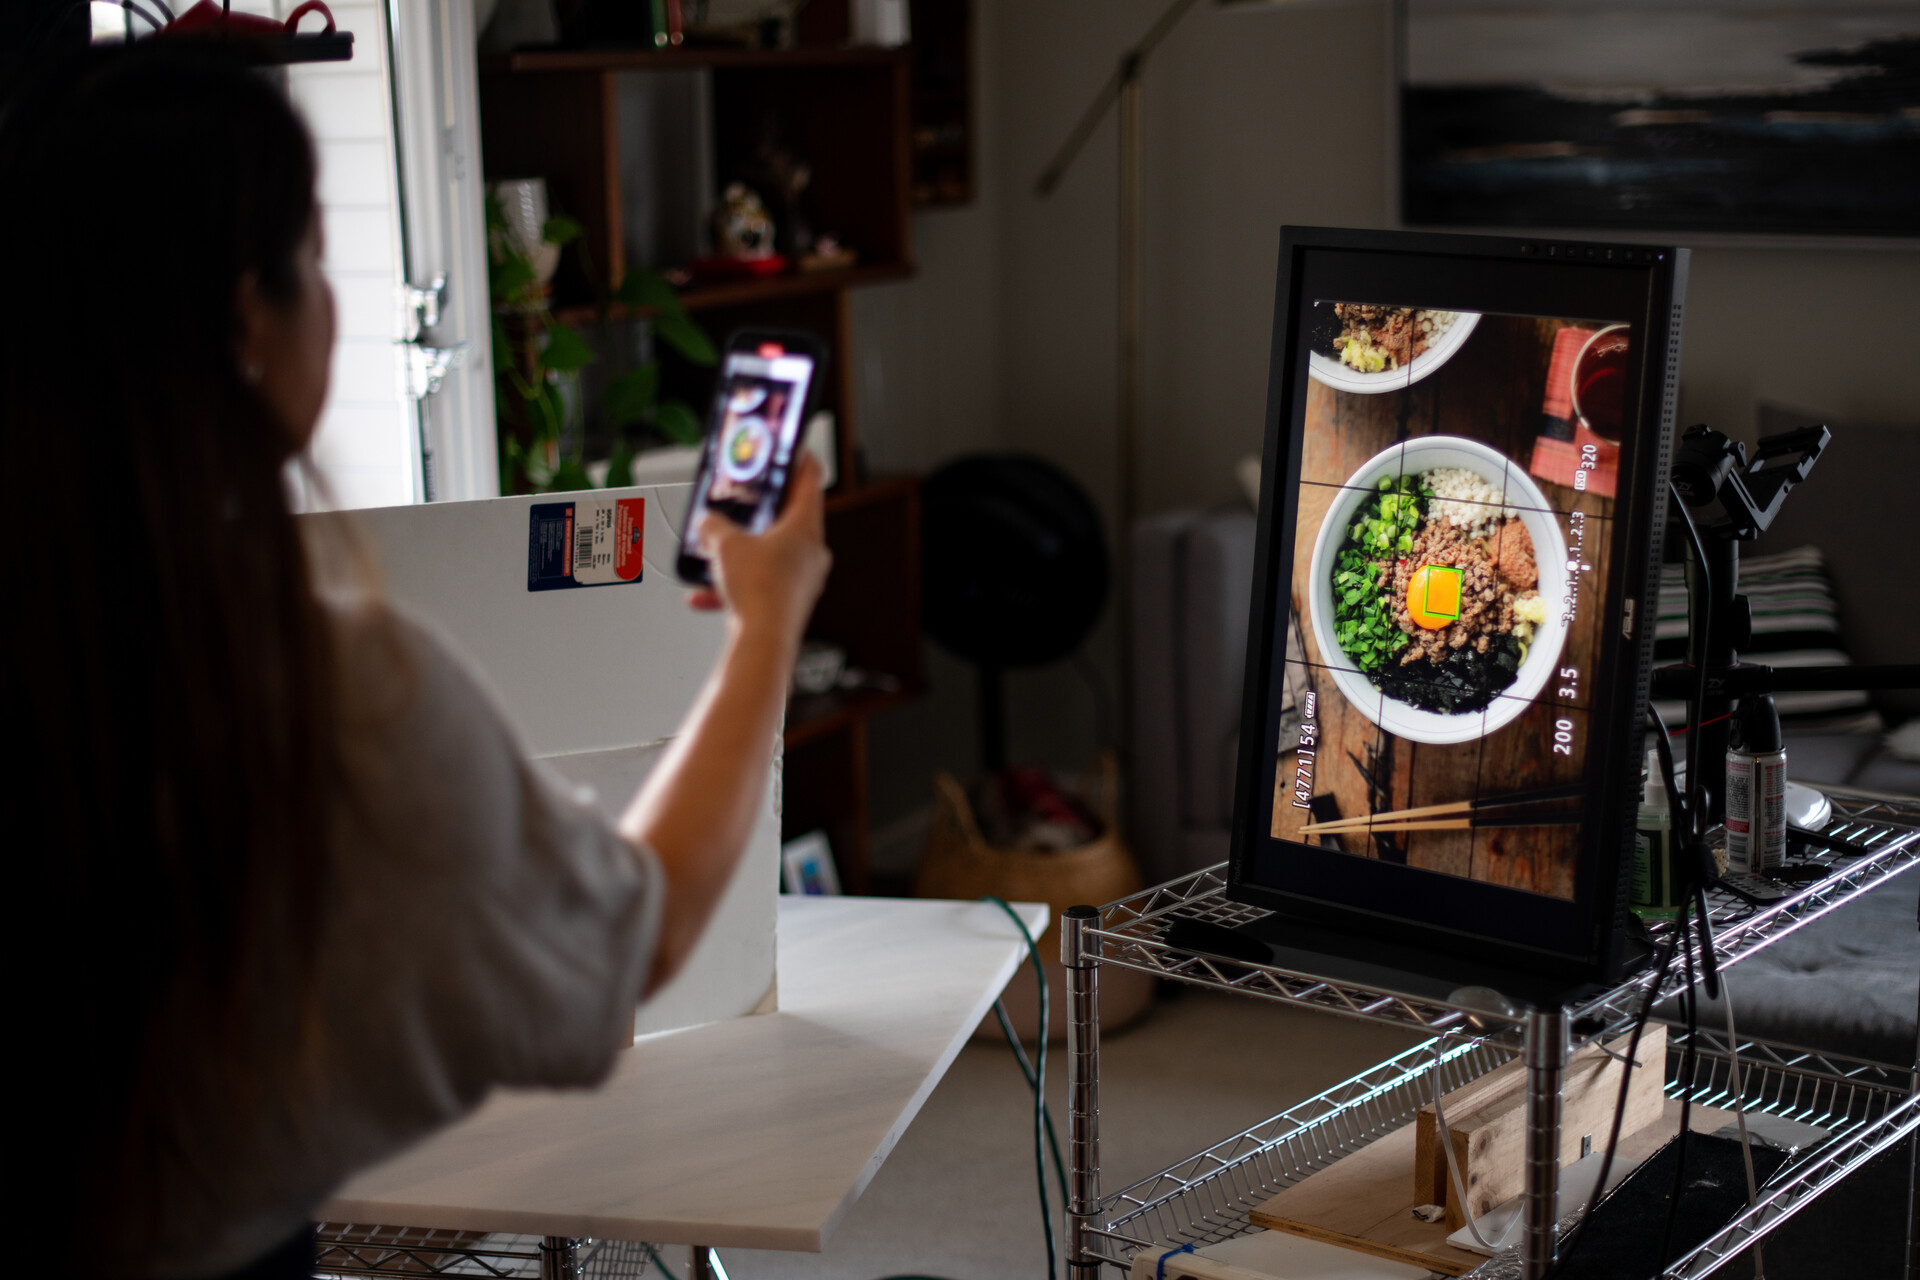 A woman uses her mobile phone to take a picture of a bowl of noodles projected onto a large flat screen.